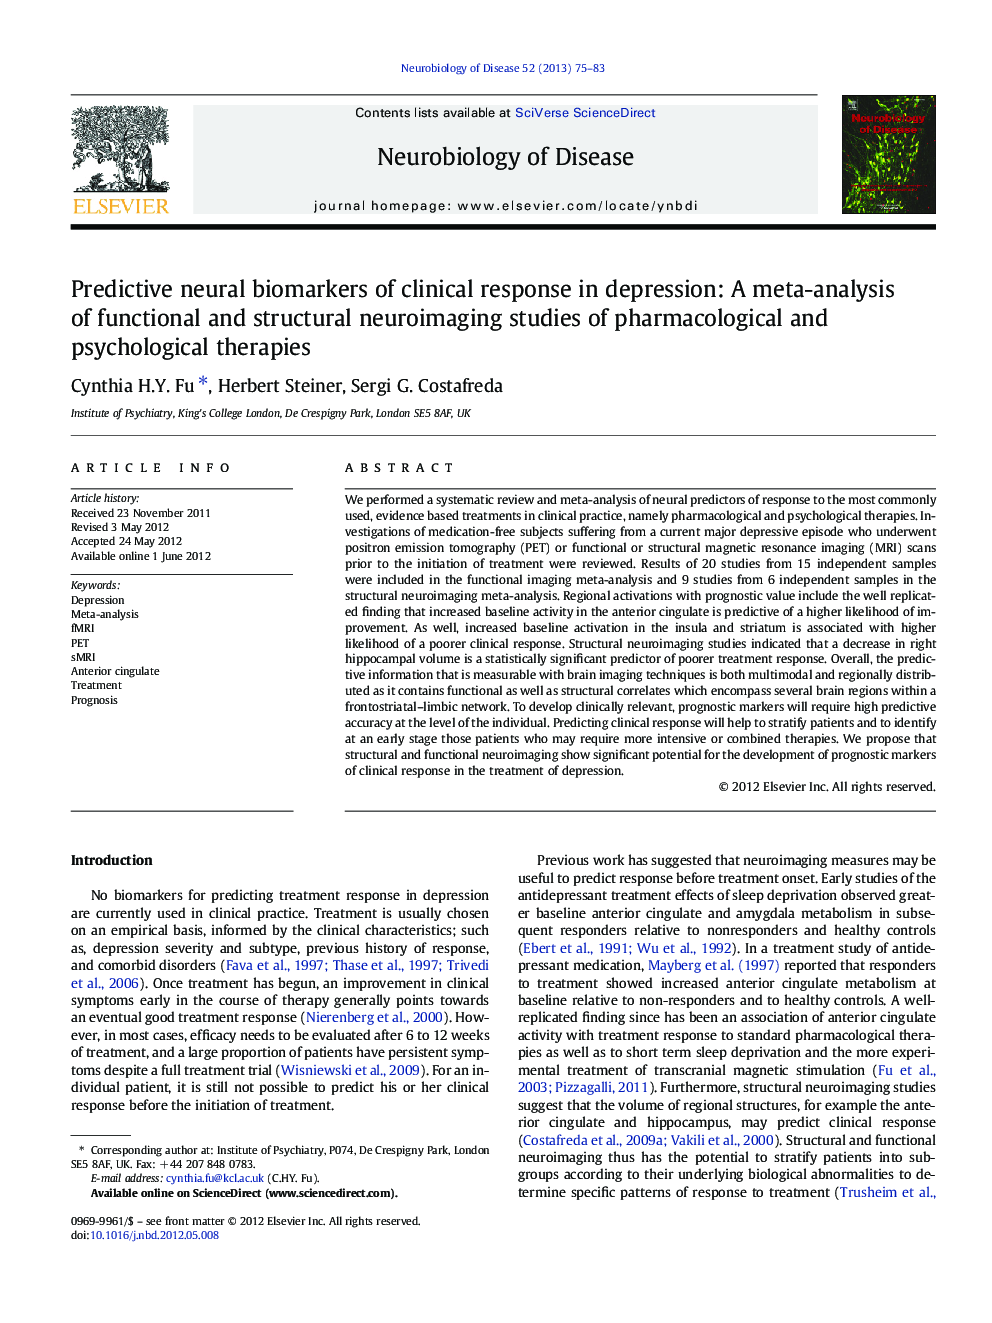 Predictive neural biomarkers of clinical response in depression: A meta-analysis of functional and structural neuroimaging studies of pharmacological and psychological therapies